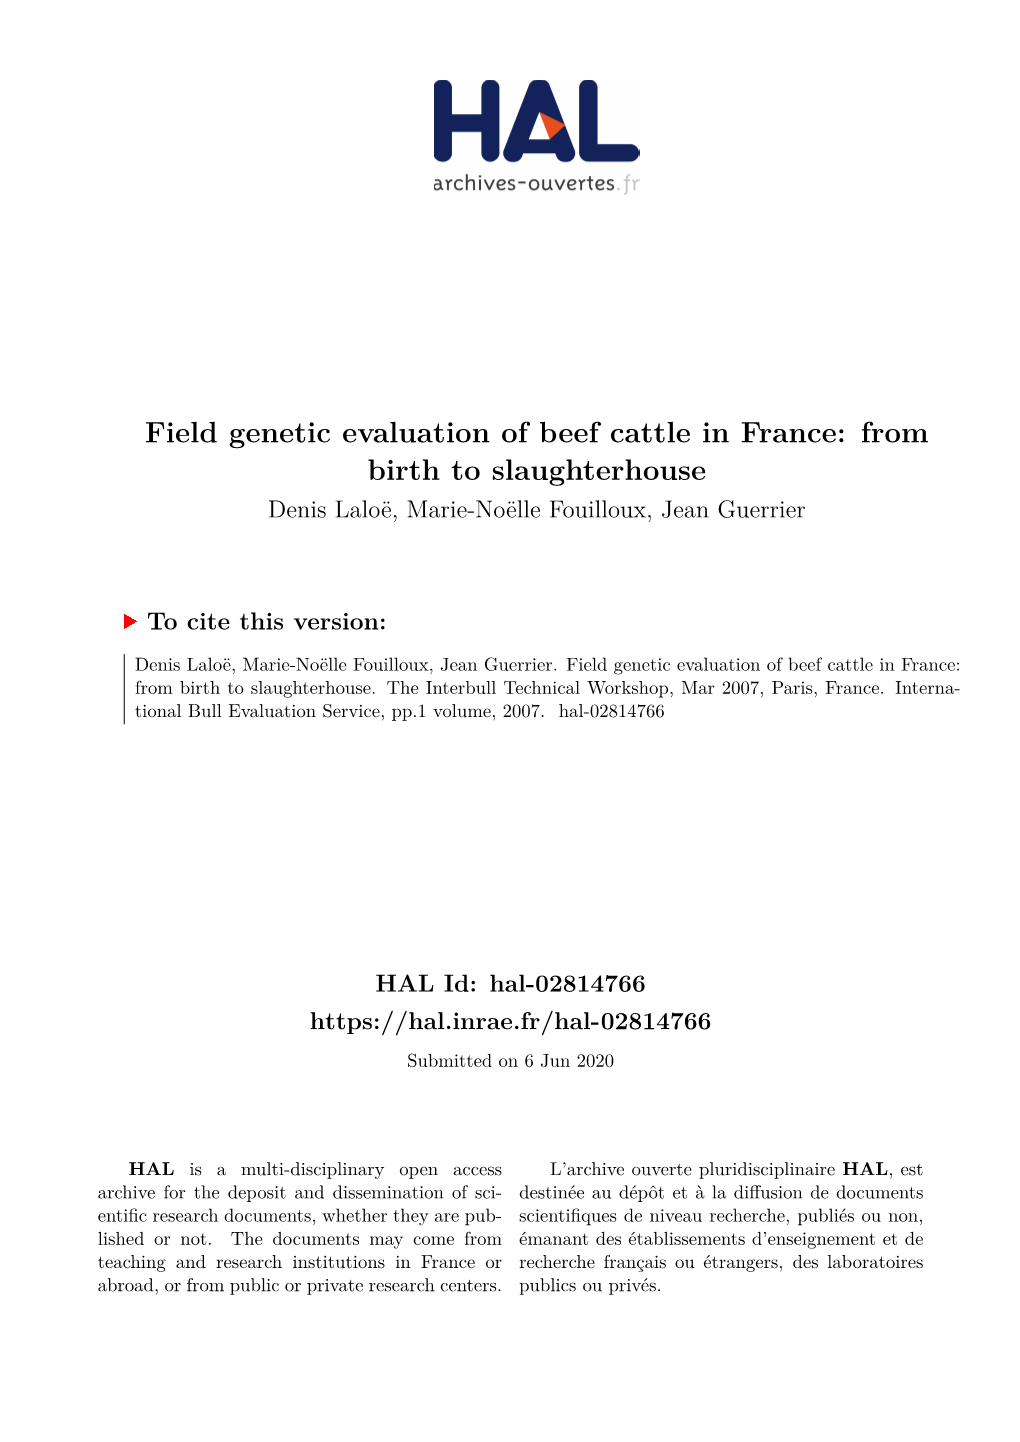 Field Genetic Evaluation of Beef Cattle in France: from Birth to Slaughterhouse Denis Laloë, Marie-Noëlle Fouilloux, Jean Guerrier